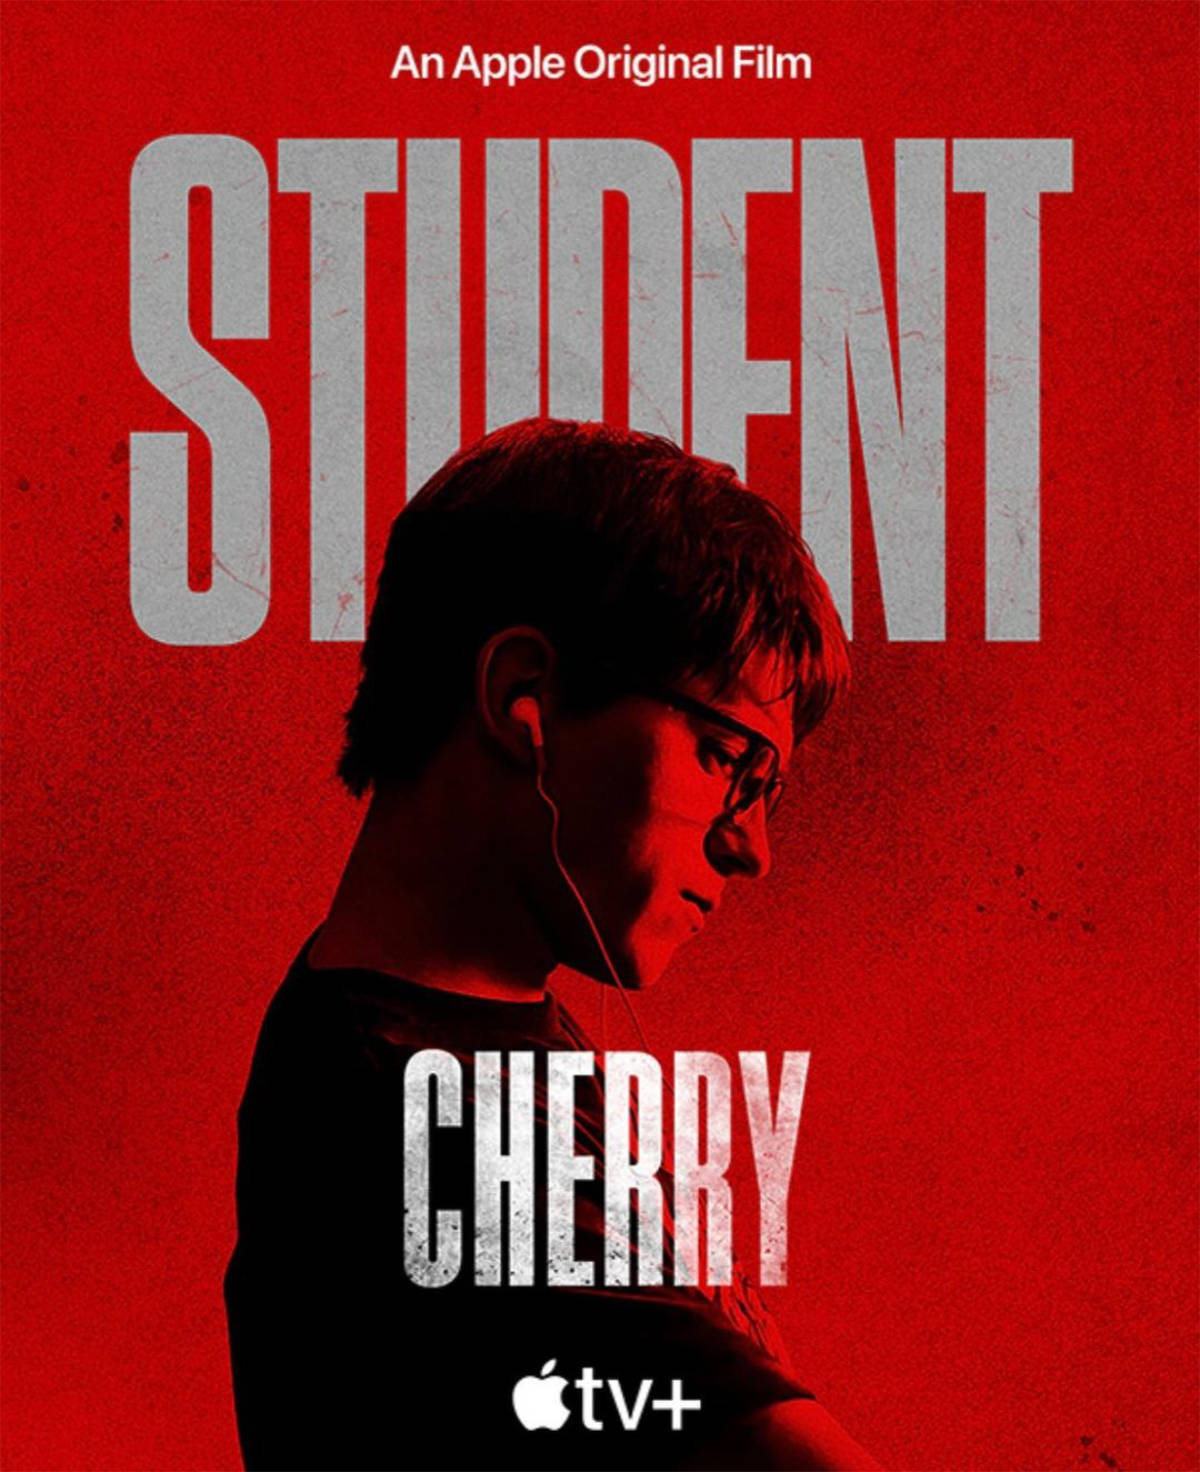 Cherry Movie Posters and Photos Released by Apple TV+